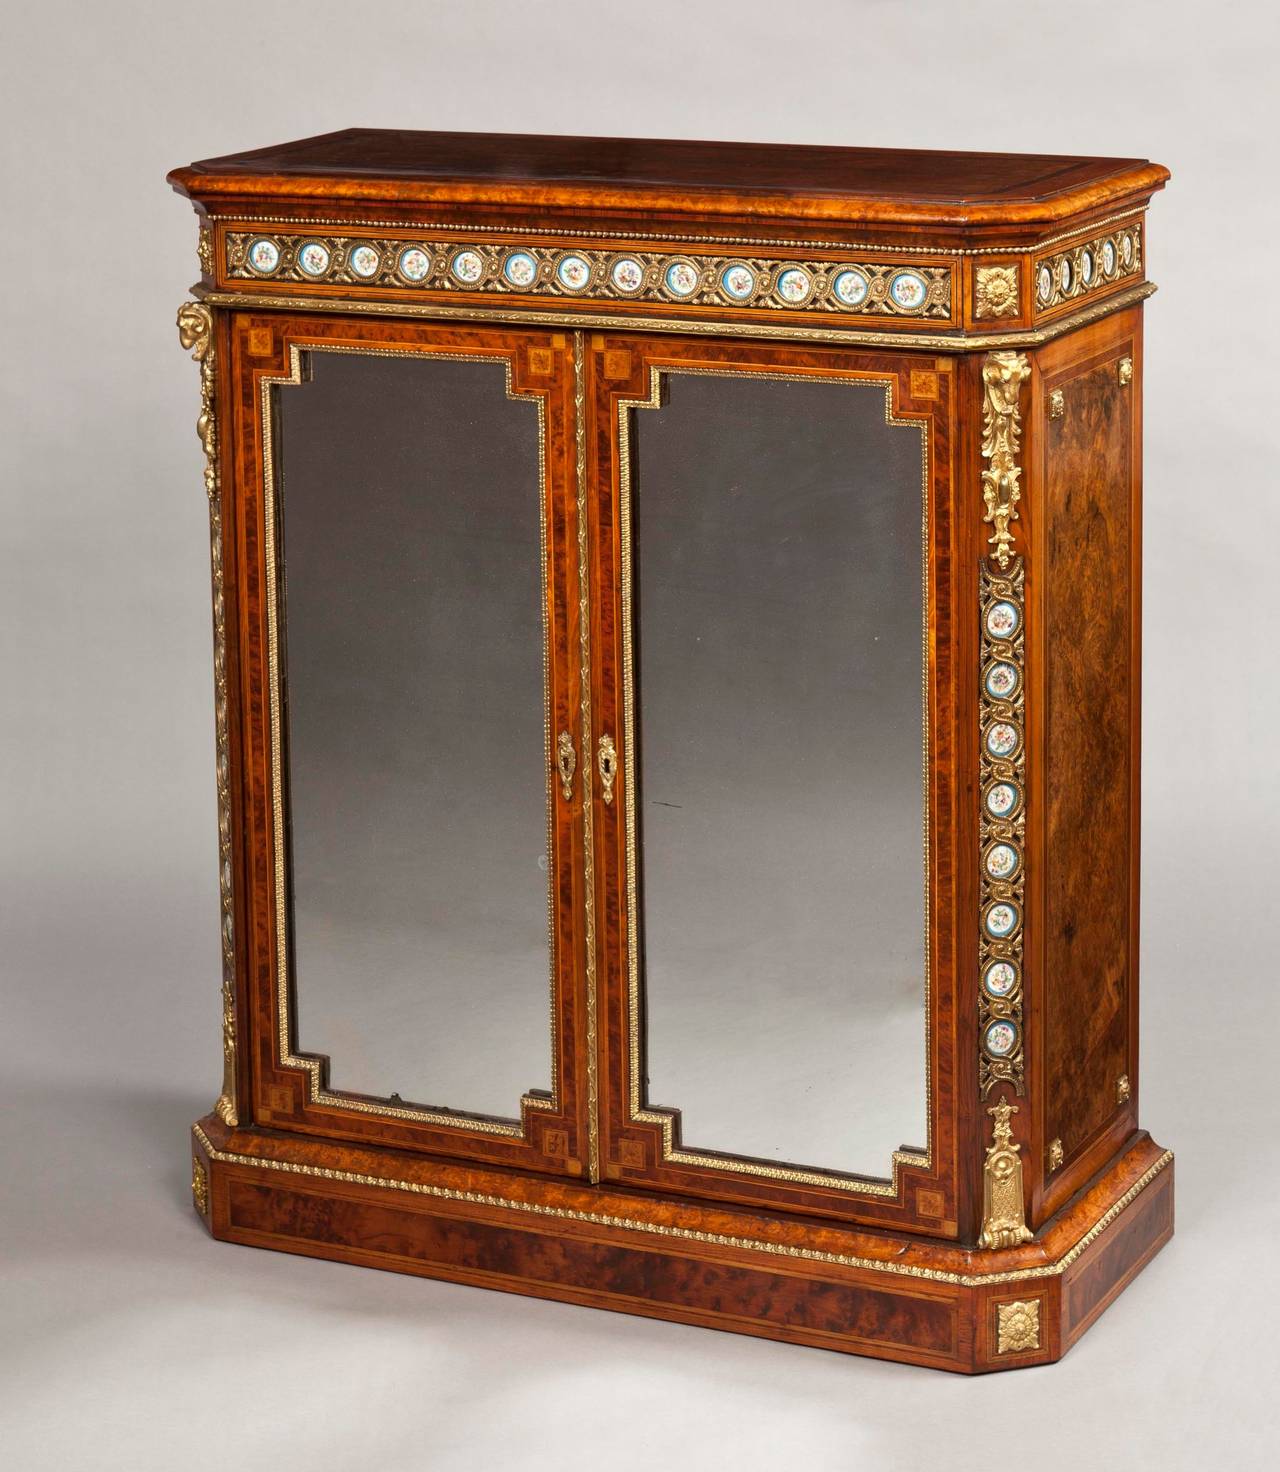 A Fine Pair of Side Cabinets

Constructed in Circassian walnut and various specimen woods, exuberantly mounted with porcelain plaques and quality gilt bronze mounts; rising from plinth bases, having canted angles, dressed with rams head spandrels